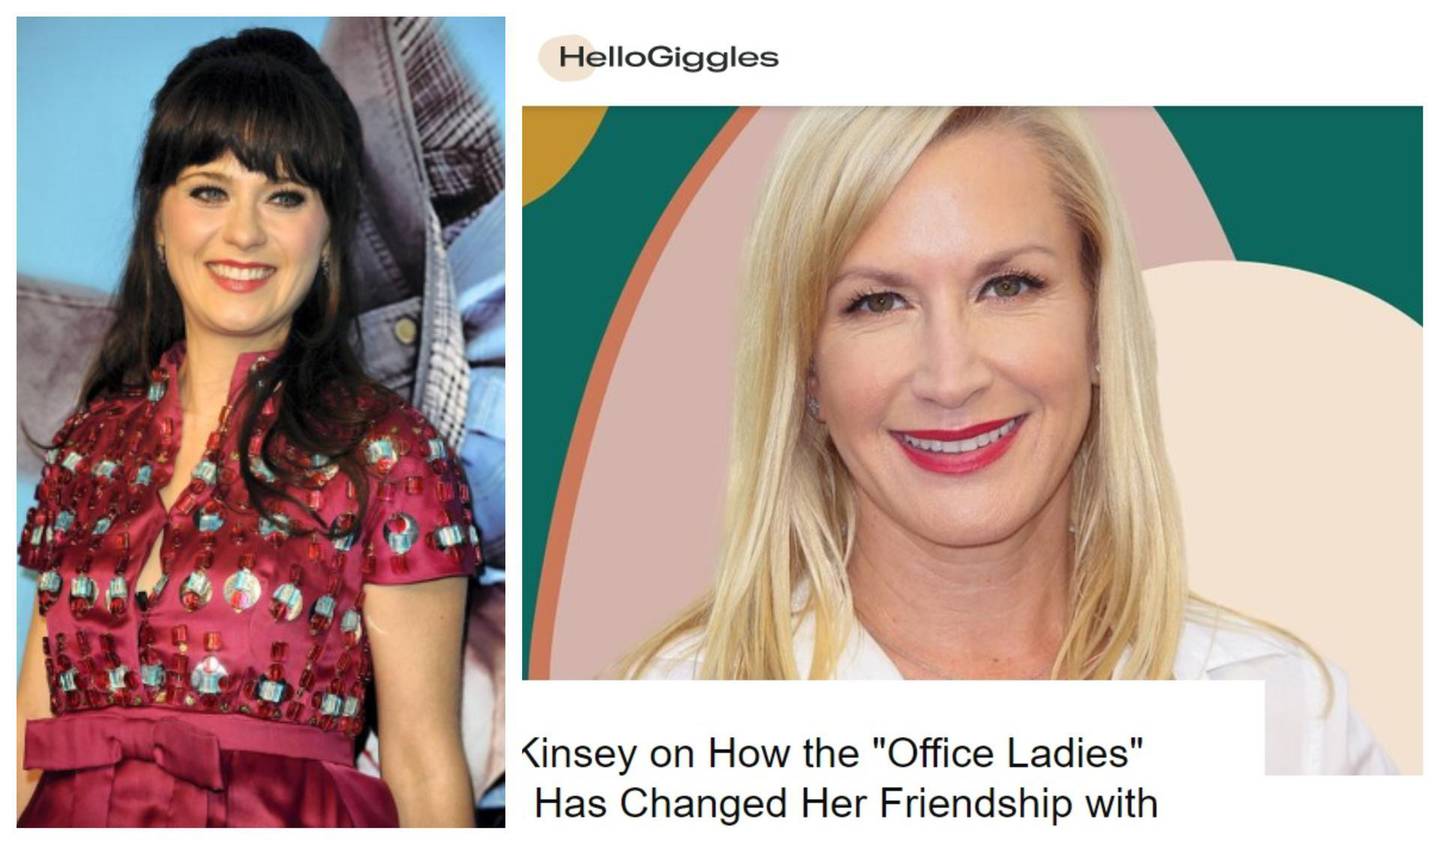 'New Girl' star Zooey Deschanel's Hello Giggles aims to put a positive spin on news and features for women. Getty Images